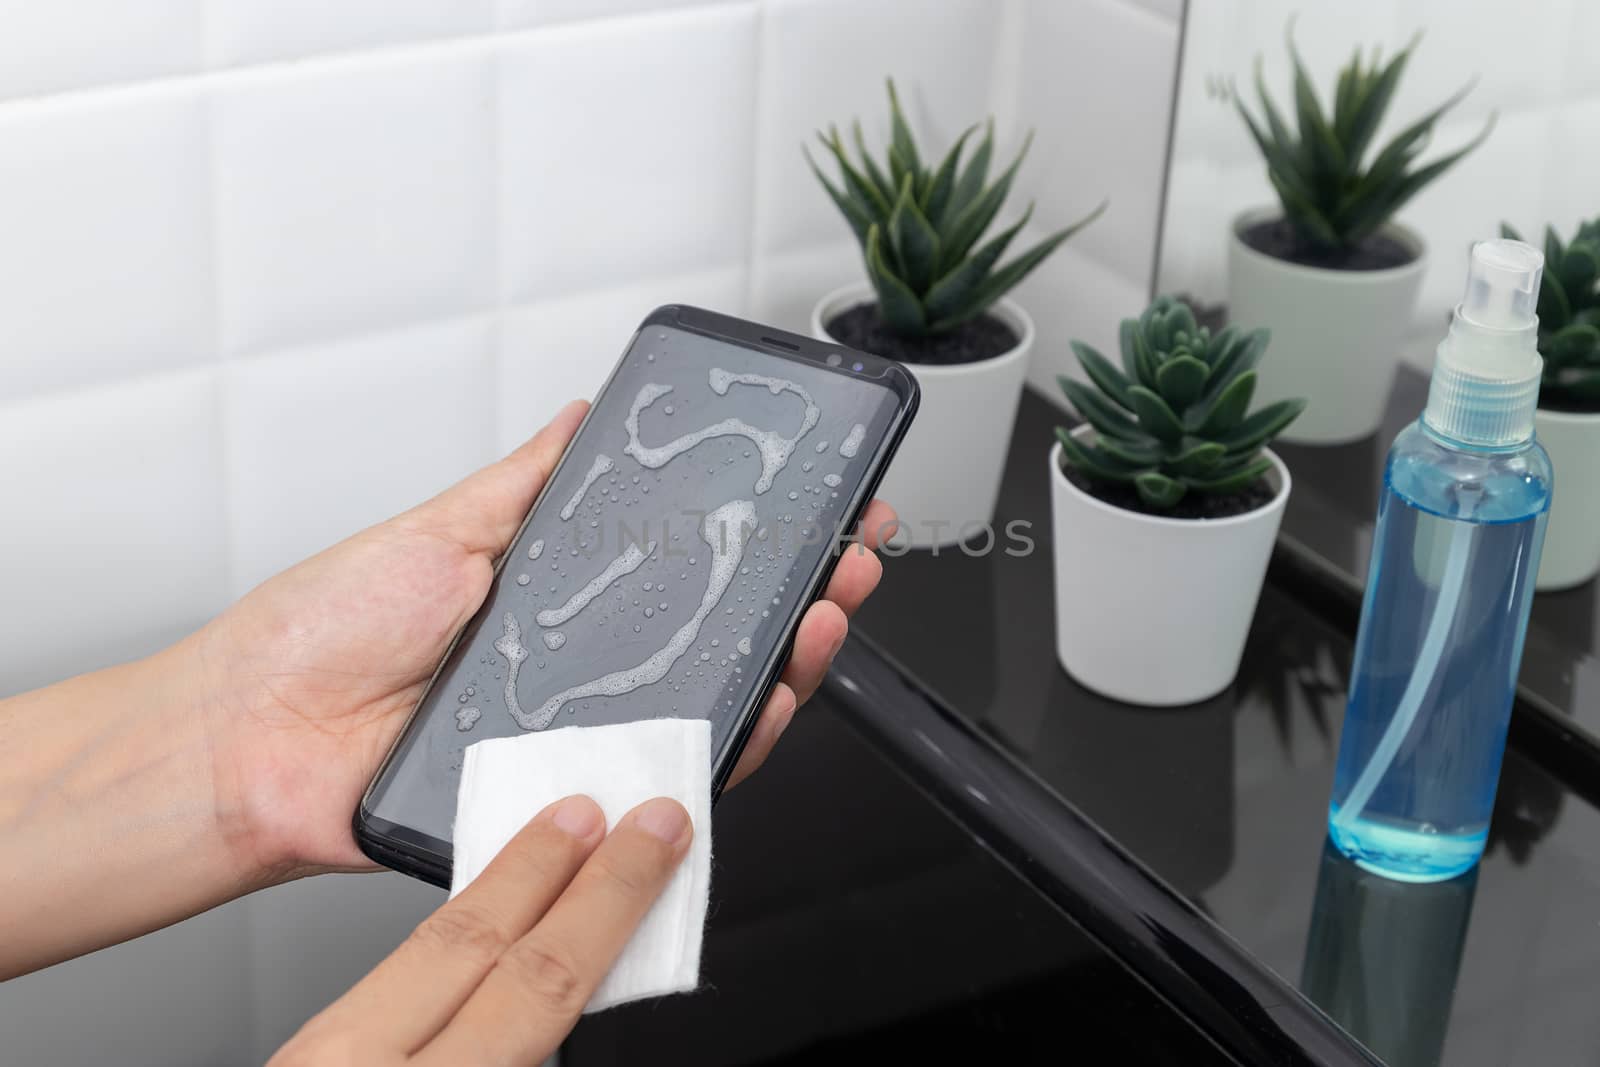 disinfect, sanitize, hygiene care. cleaning dirty stain on mobile phone touch screen for disinfection, prevention of germs spreading during infections of COVID-19 coronavirus